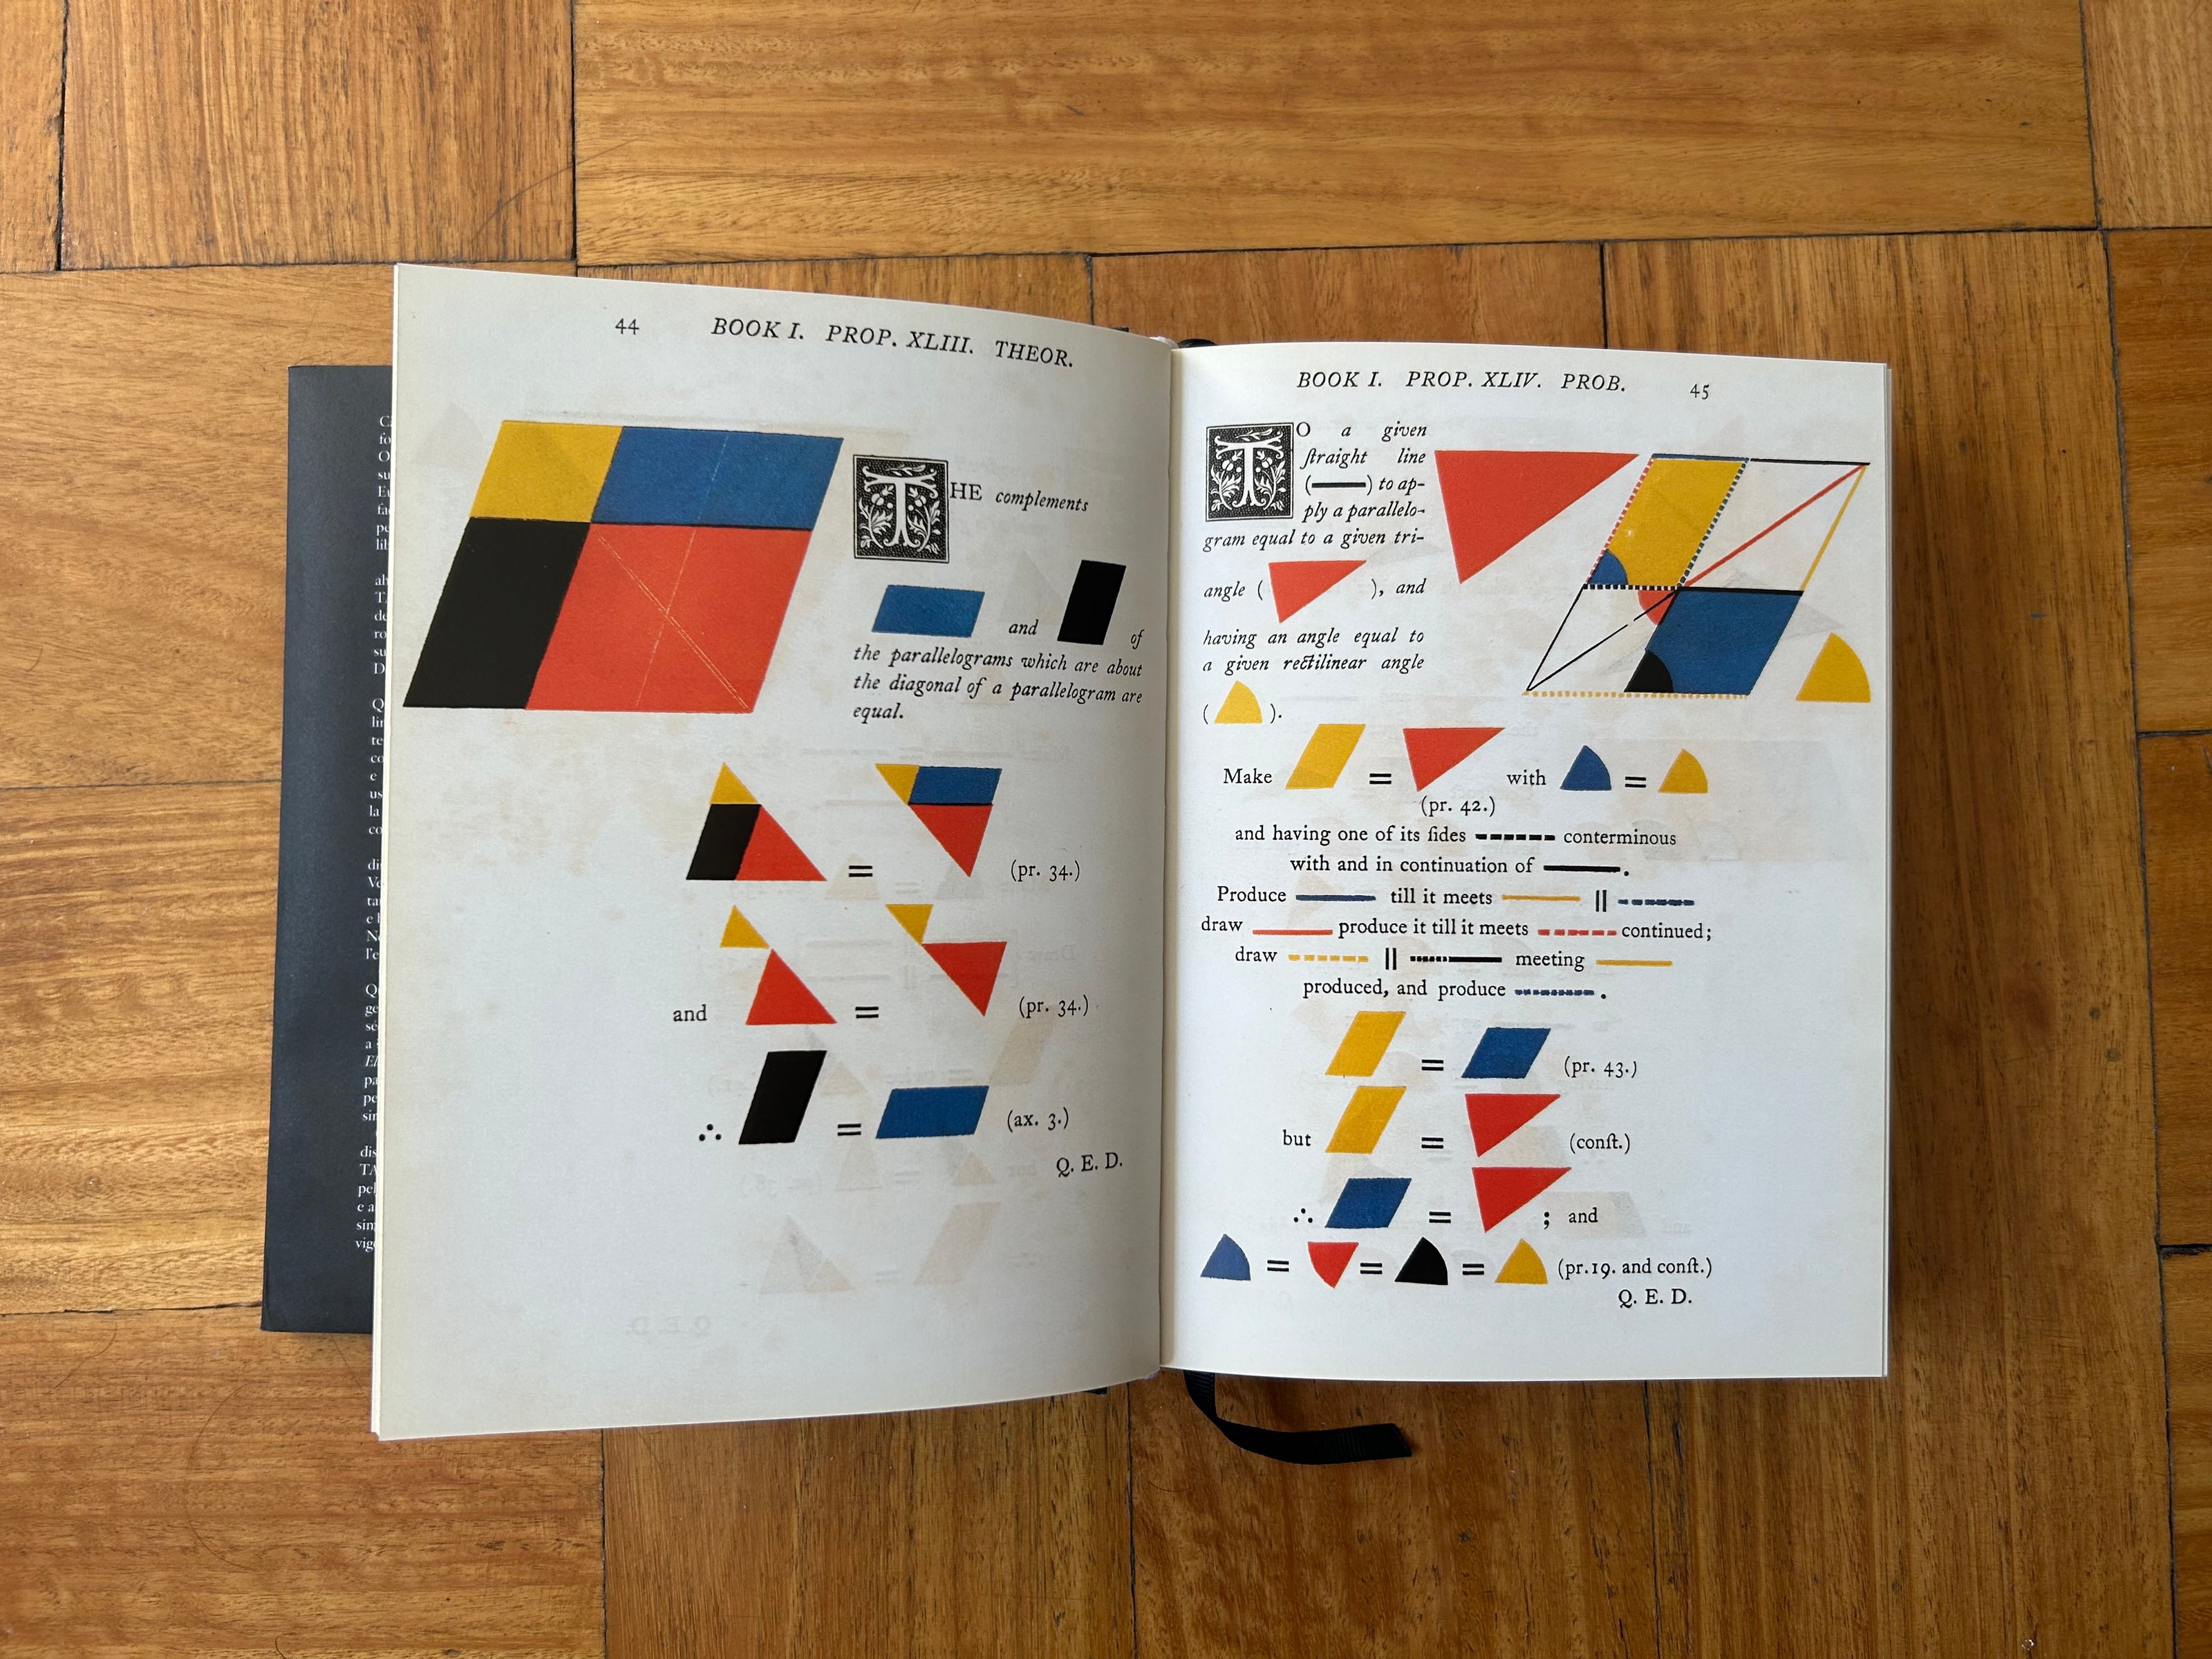 Photo of book open showing geometric diagrams of quadrilaterals, against a wooden floor.